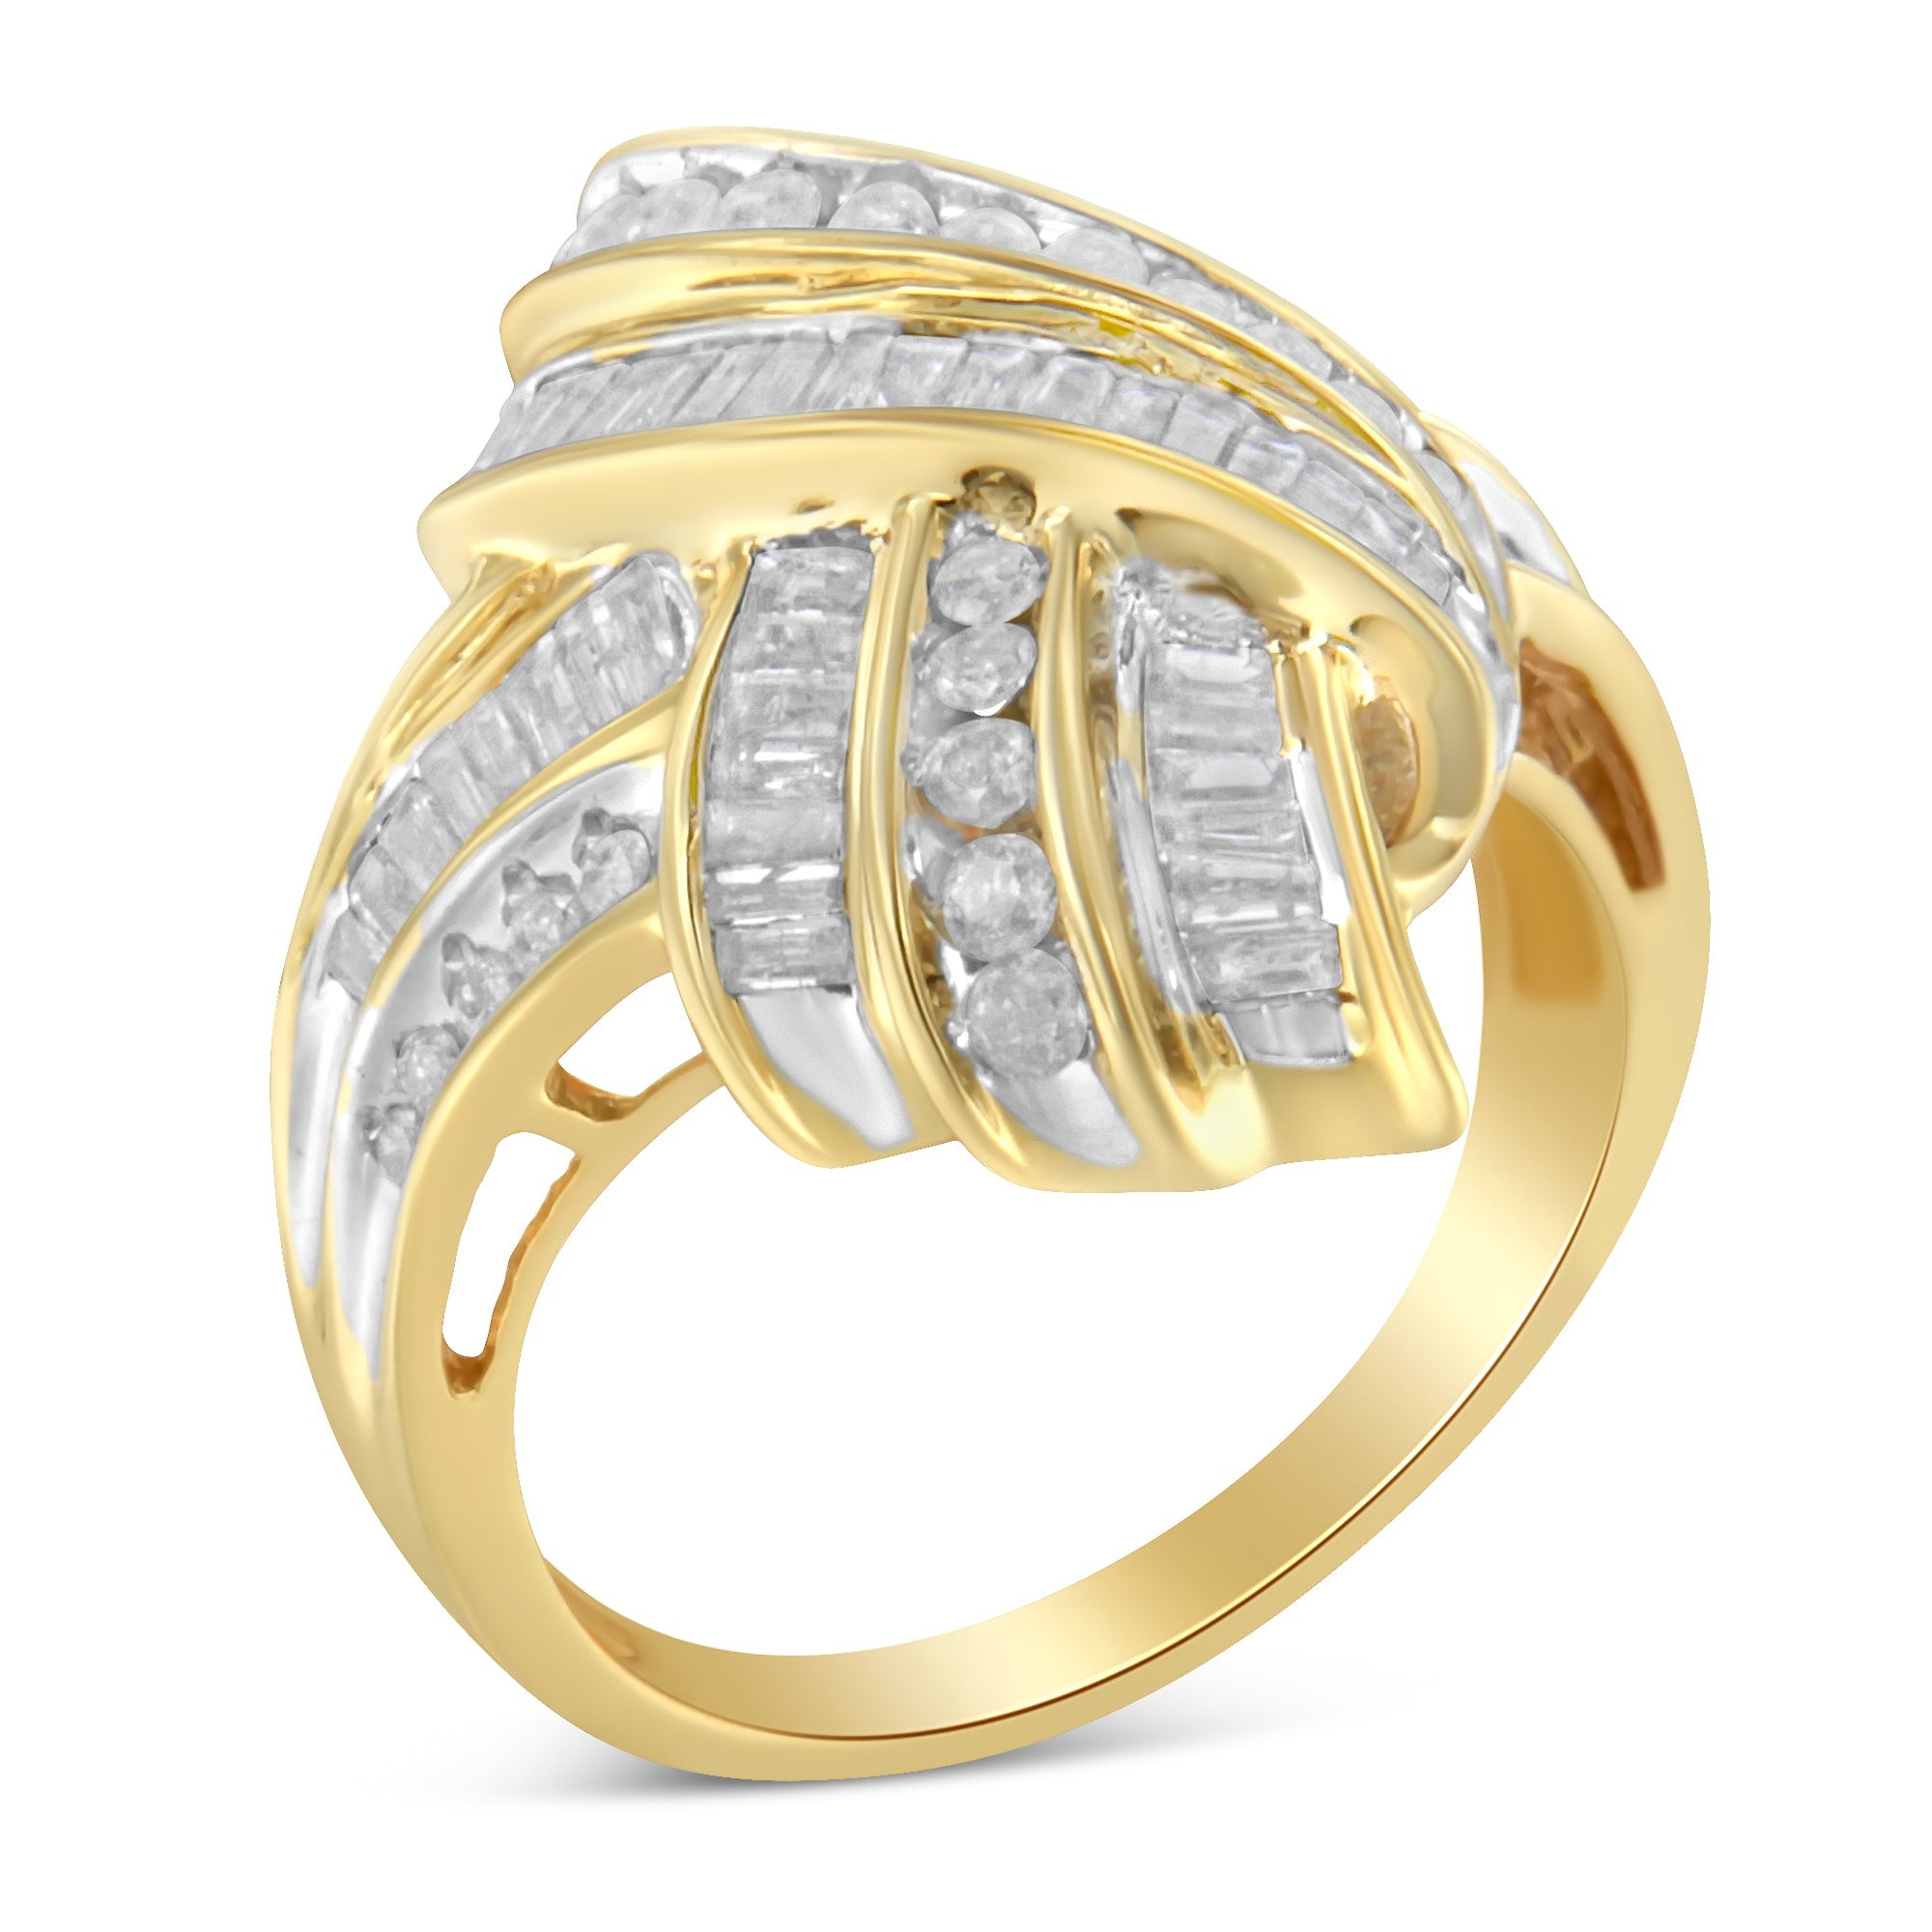 10K-Yellow-Gold-Plated-.925-Sterling-Silver-1.0-Cttw-Round-&-Baguette-Diamond-Knot-Channel-Statement-Ring-(I-J-Color,-I2-I3-Clarity)-Size-7-Rings